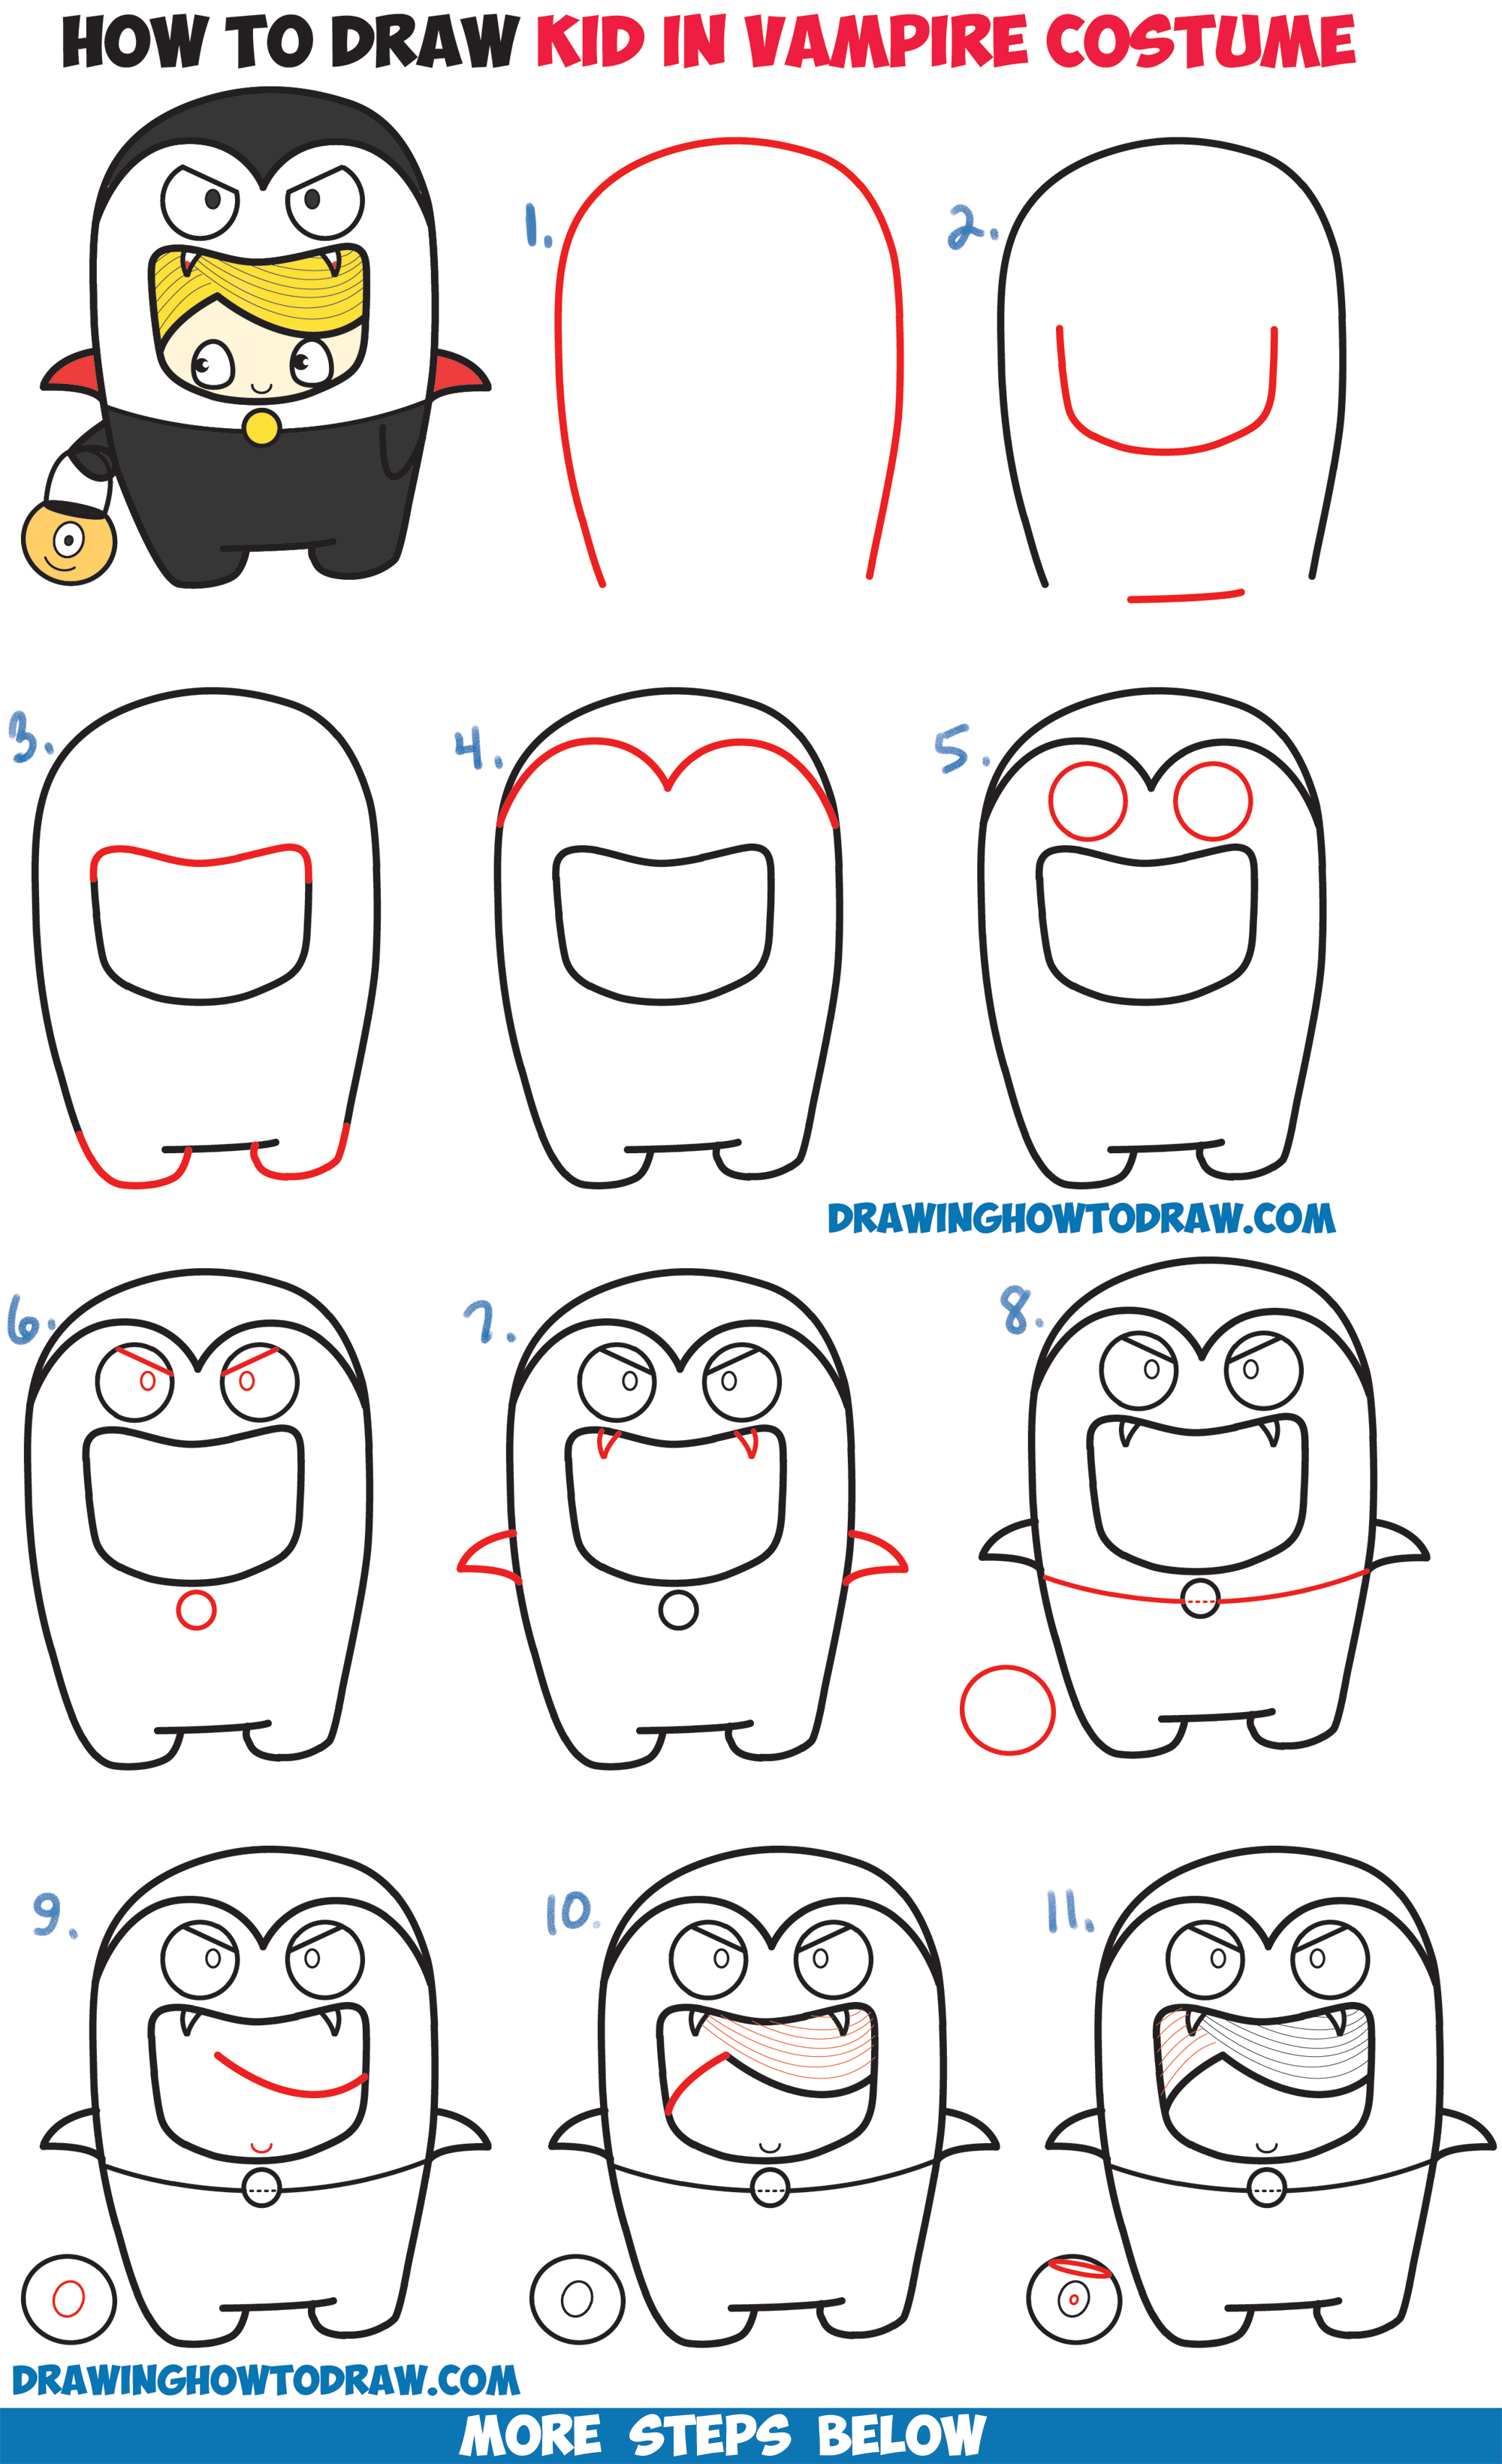 How to Draw a Kid in a Halloween Vampire Costume (Cute Kawaii) Easy